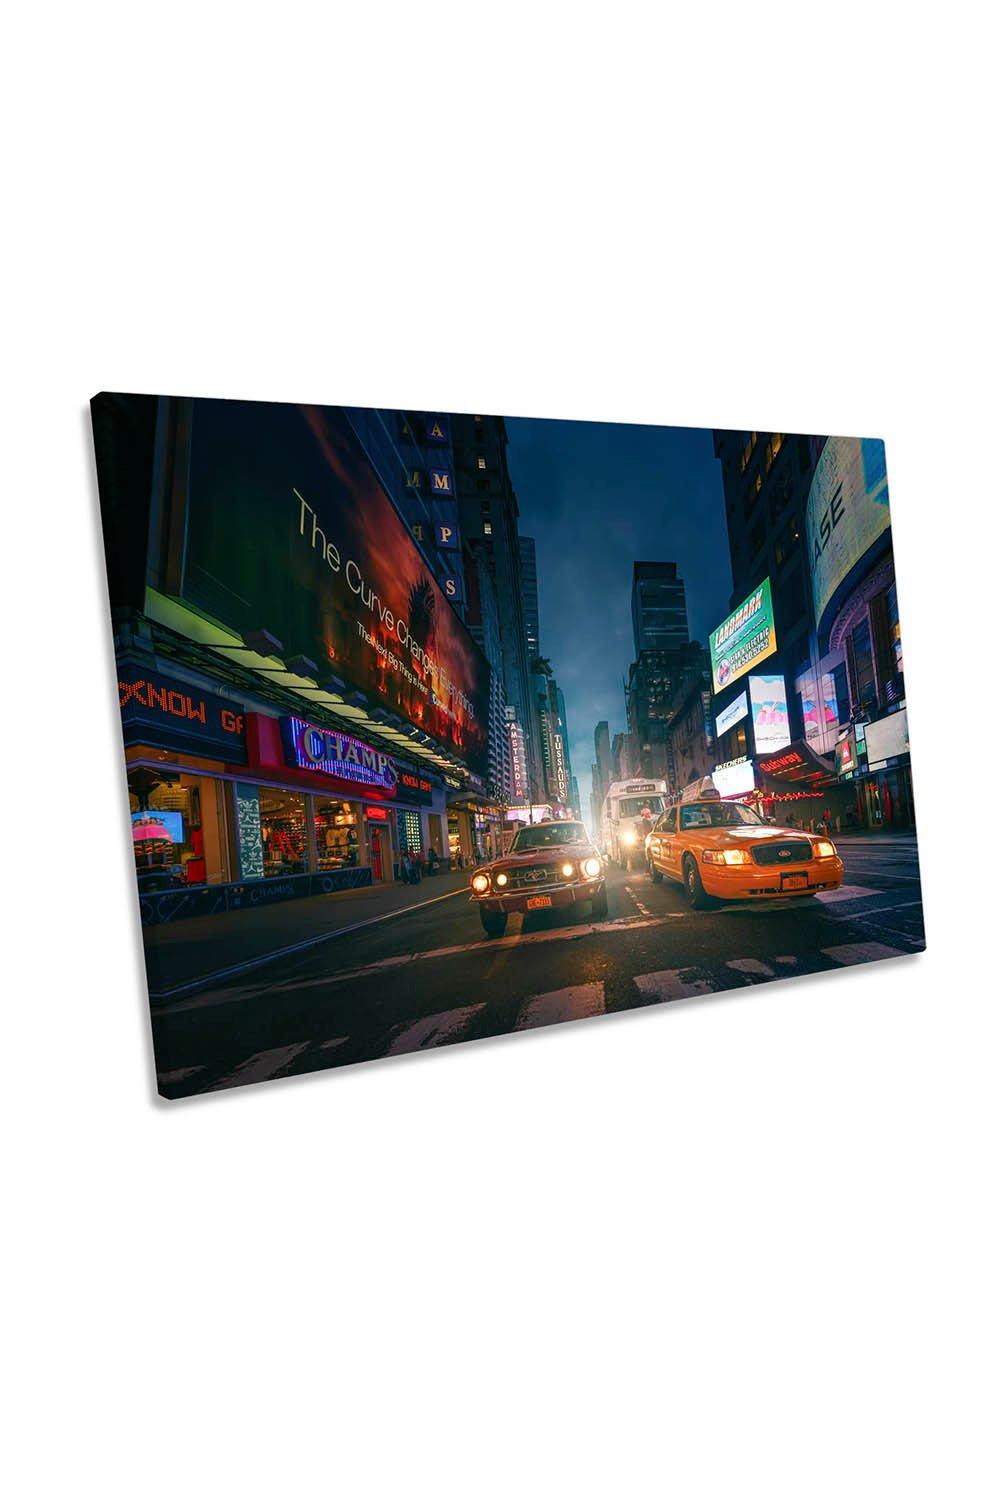 New York City Streets Taxi Cab Cars Canvas Wall Art Picture Print